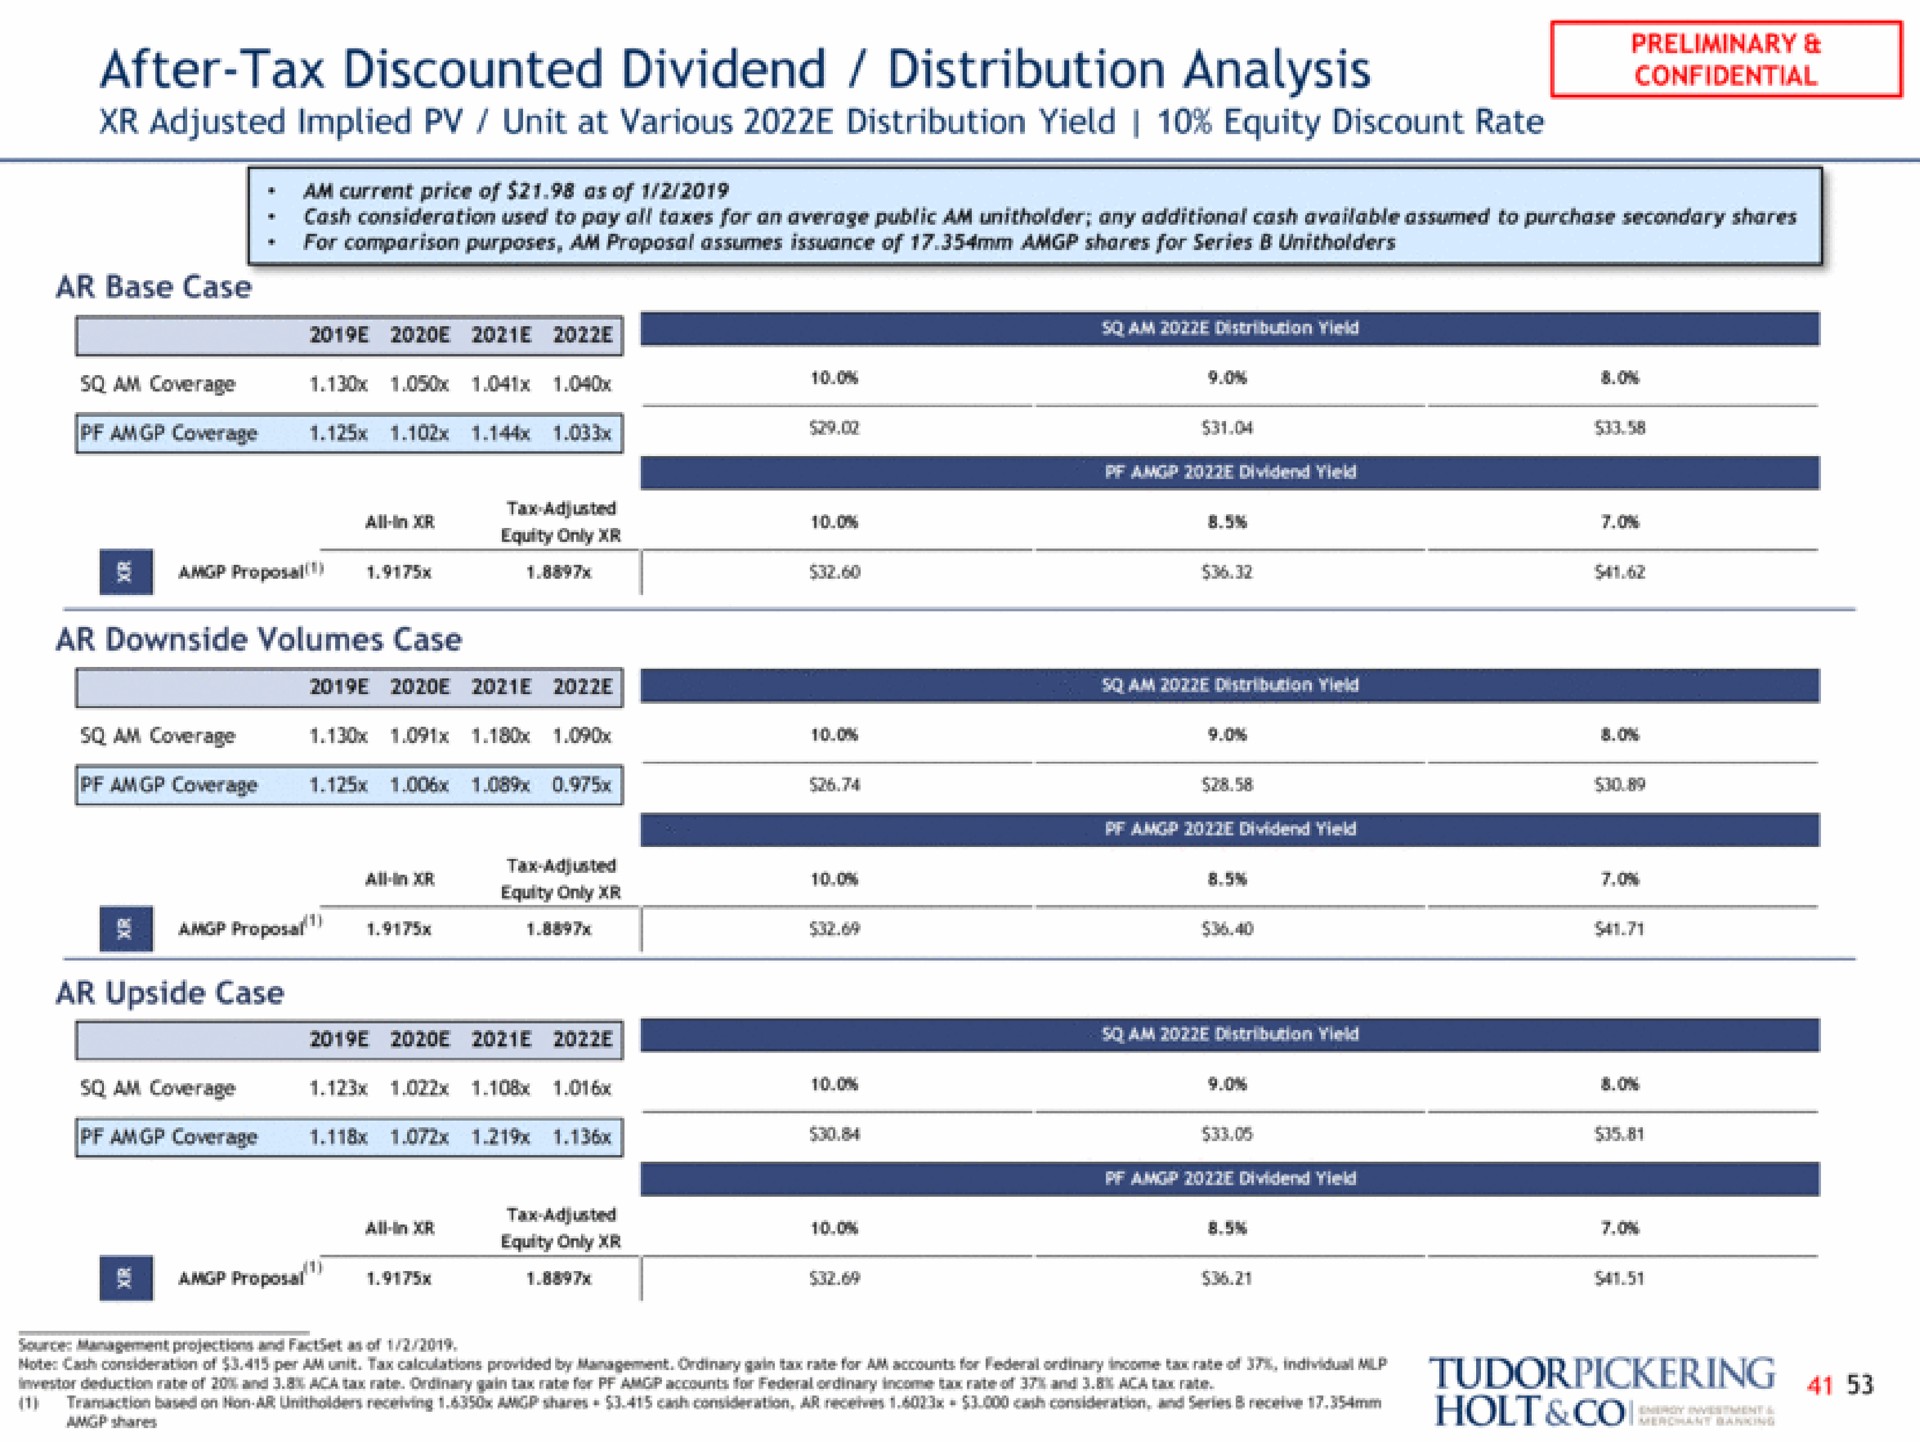 after tax discounted dividend distribution analysis confidential holt shares | Tudor, Pickering, Holt & Co